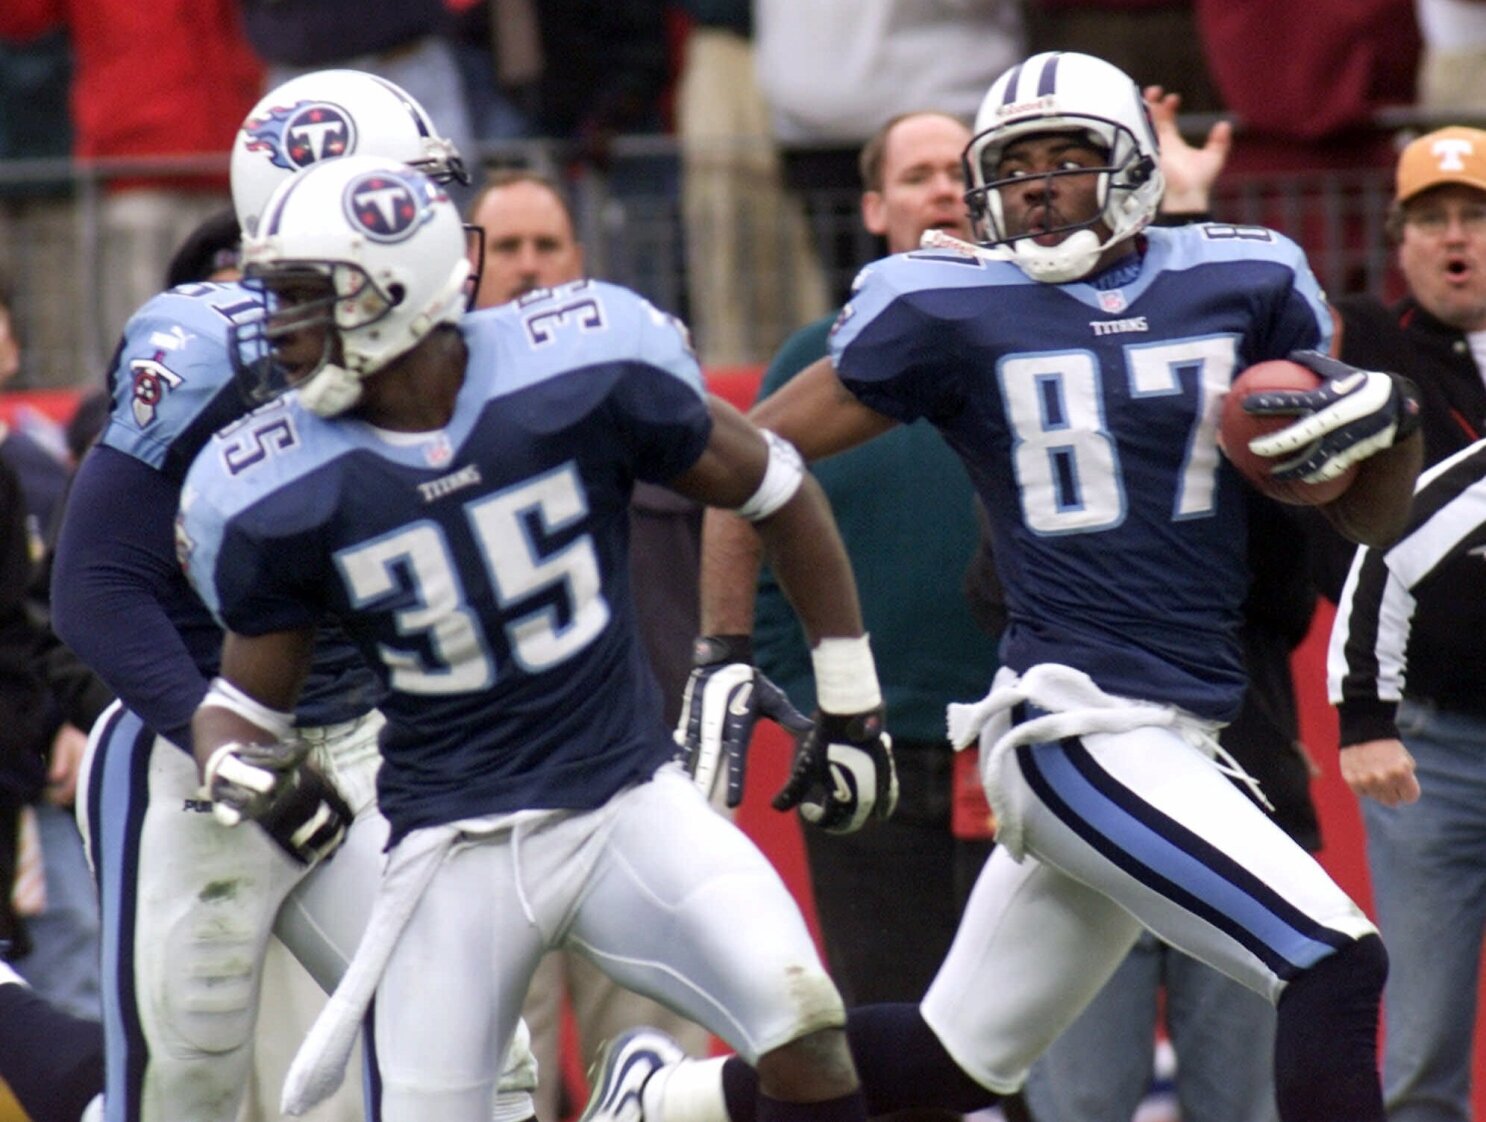 dyson tennessee titans